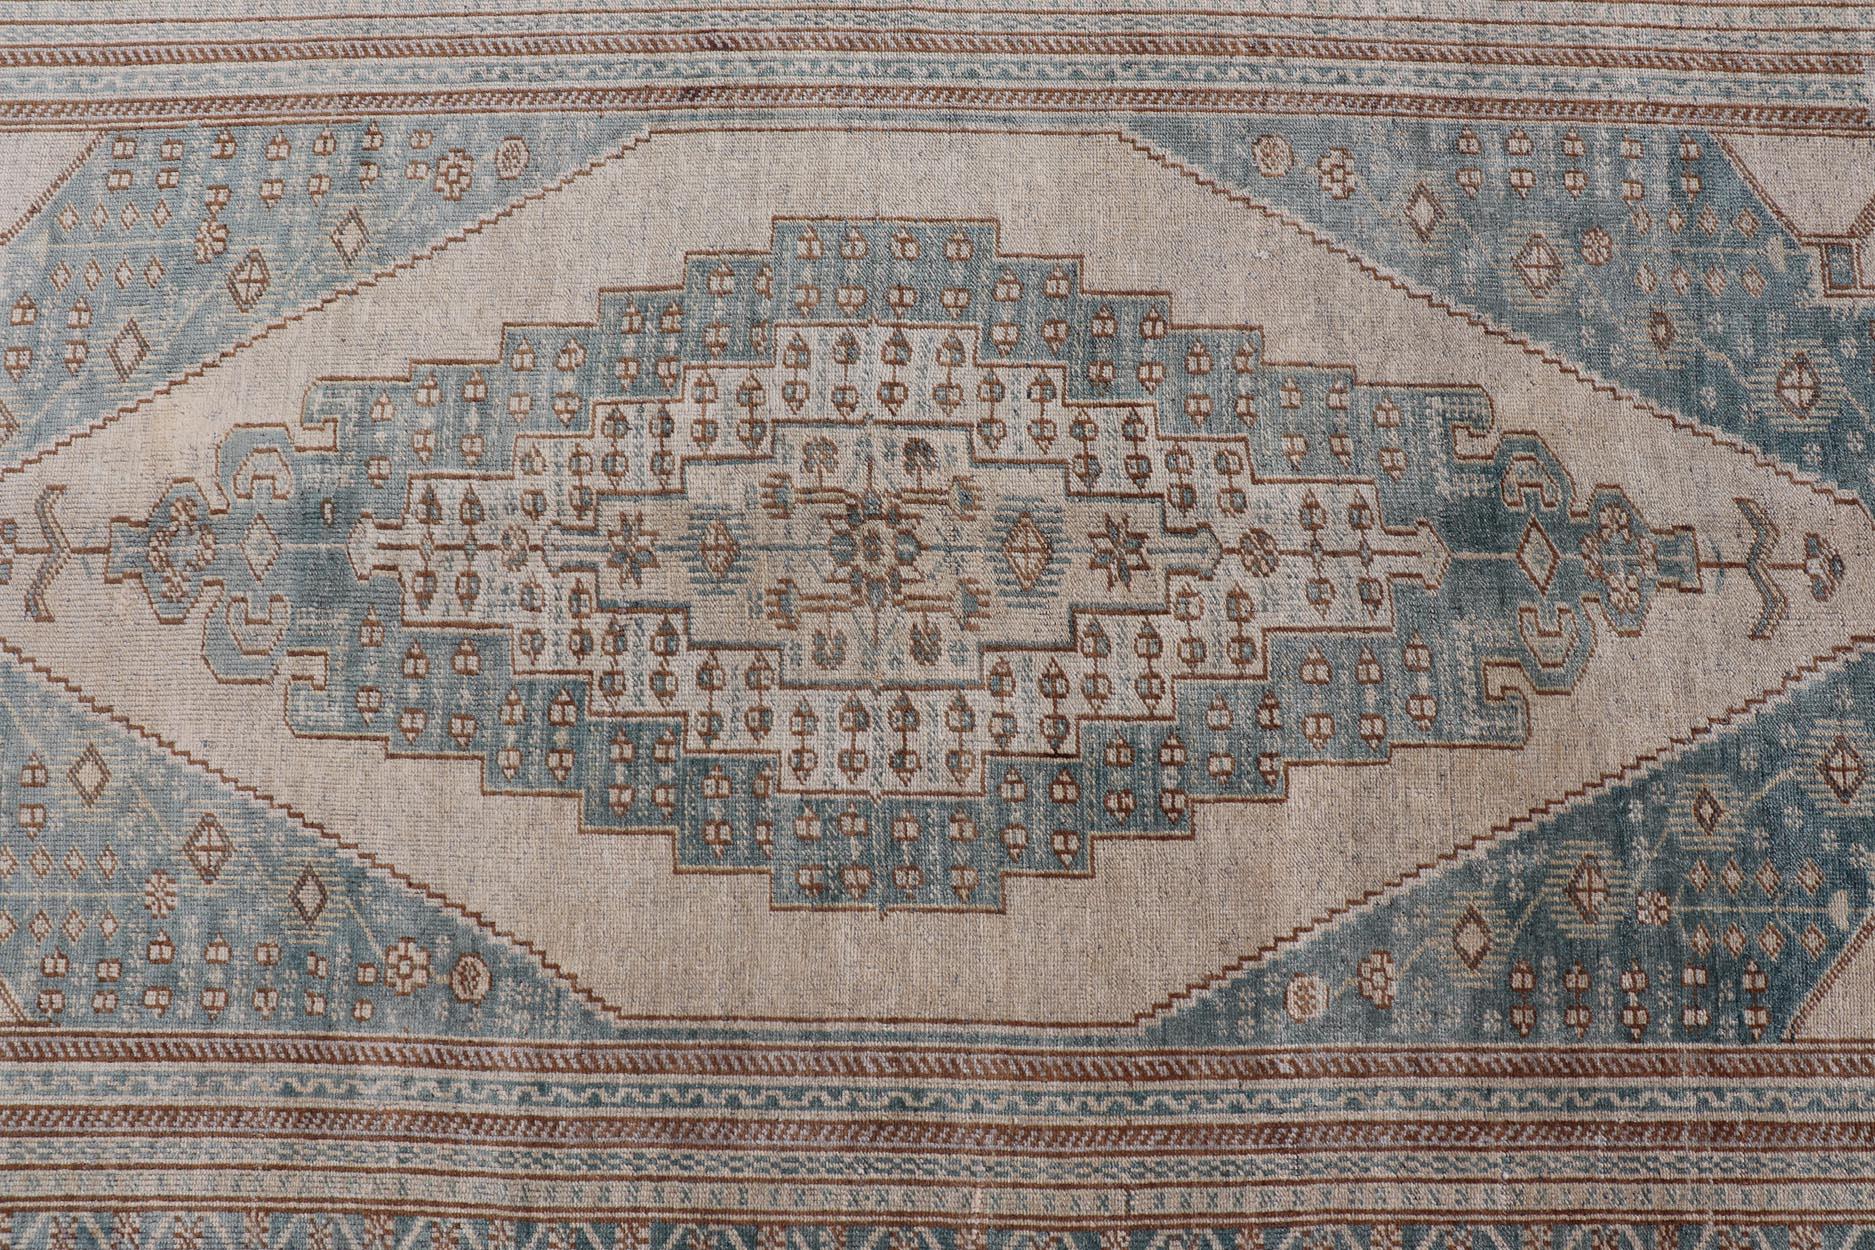 Vintage Oushak rug in muted taupe, tan, and light brown, and light blue Turkish Oushak rug with taupe and blue. Keivan Woven Arts / rug TU-MTU-4963 country of origin / type: Turkey / 1940, circa 1940

Measures: 5'3 x 9'6.